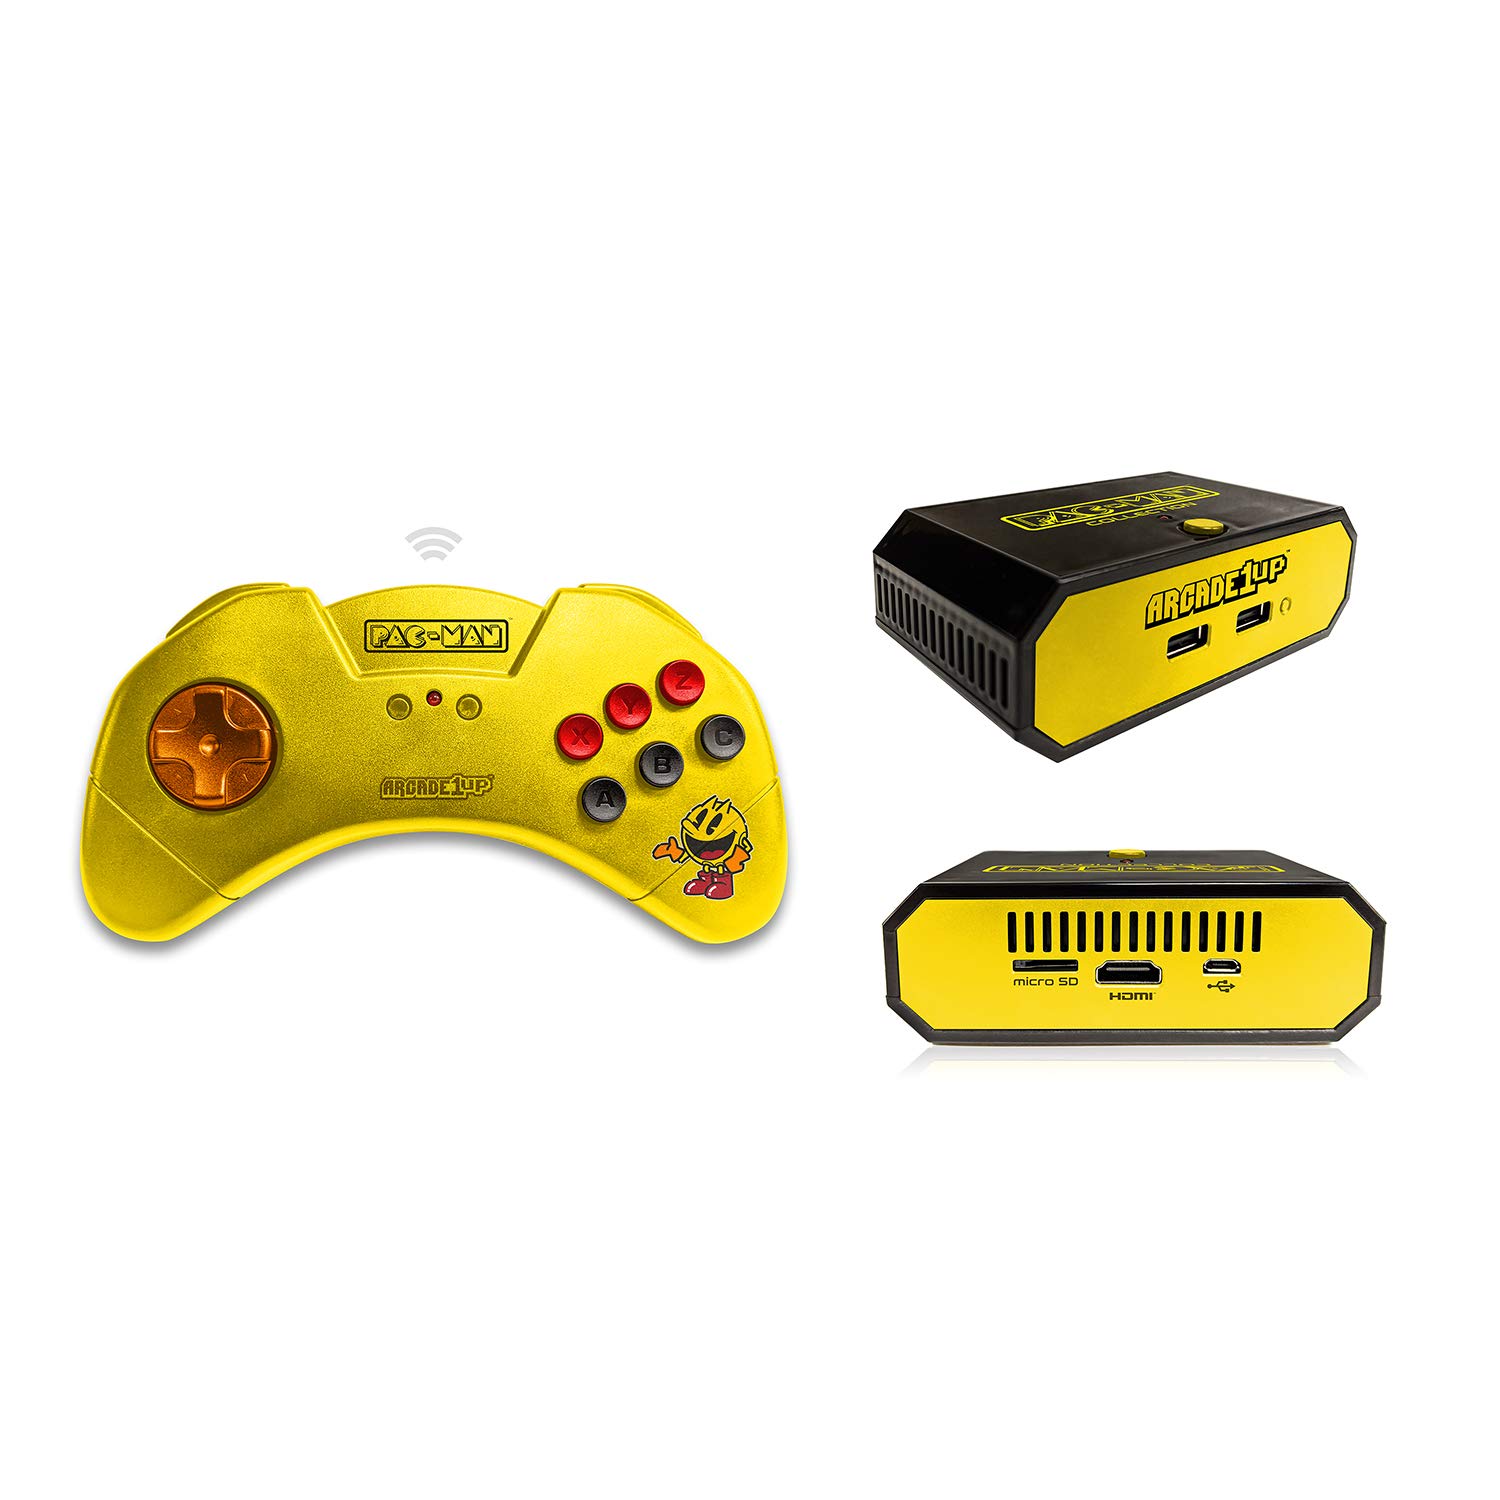 Arcade1Up PAC-MAN HDMI Game Console w/Wireless Controller & 10 Games  - $14.99 after new customer coupon